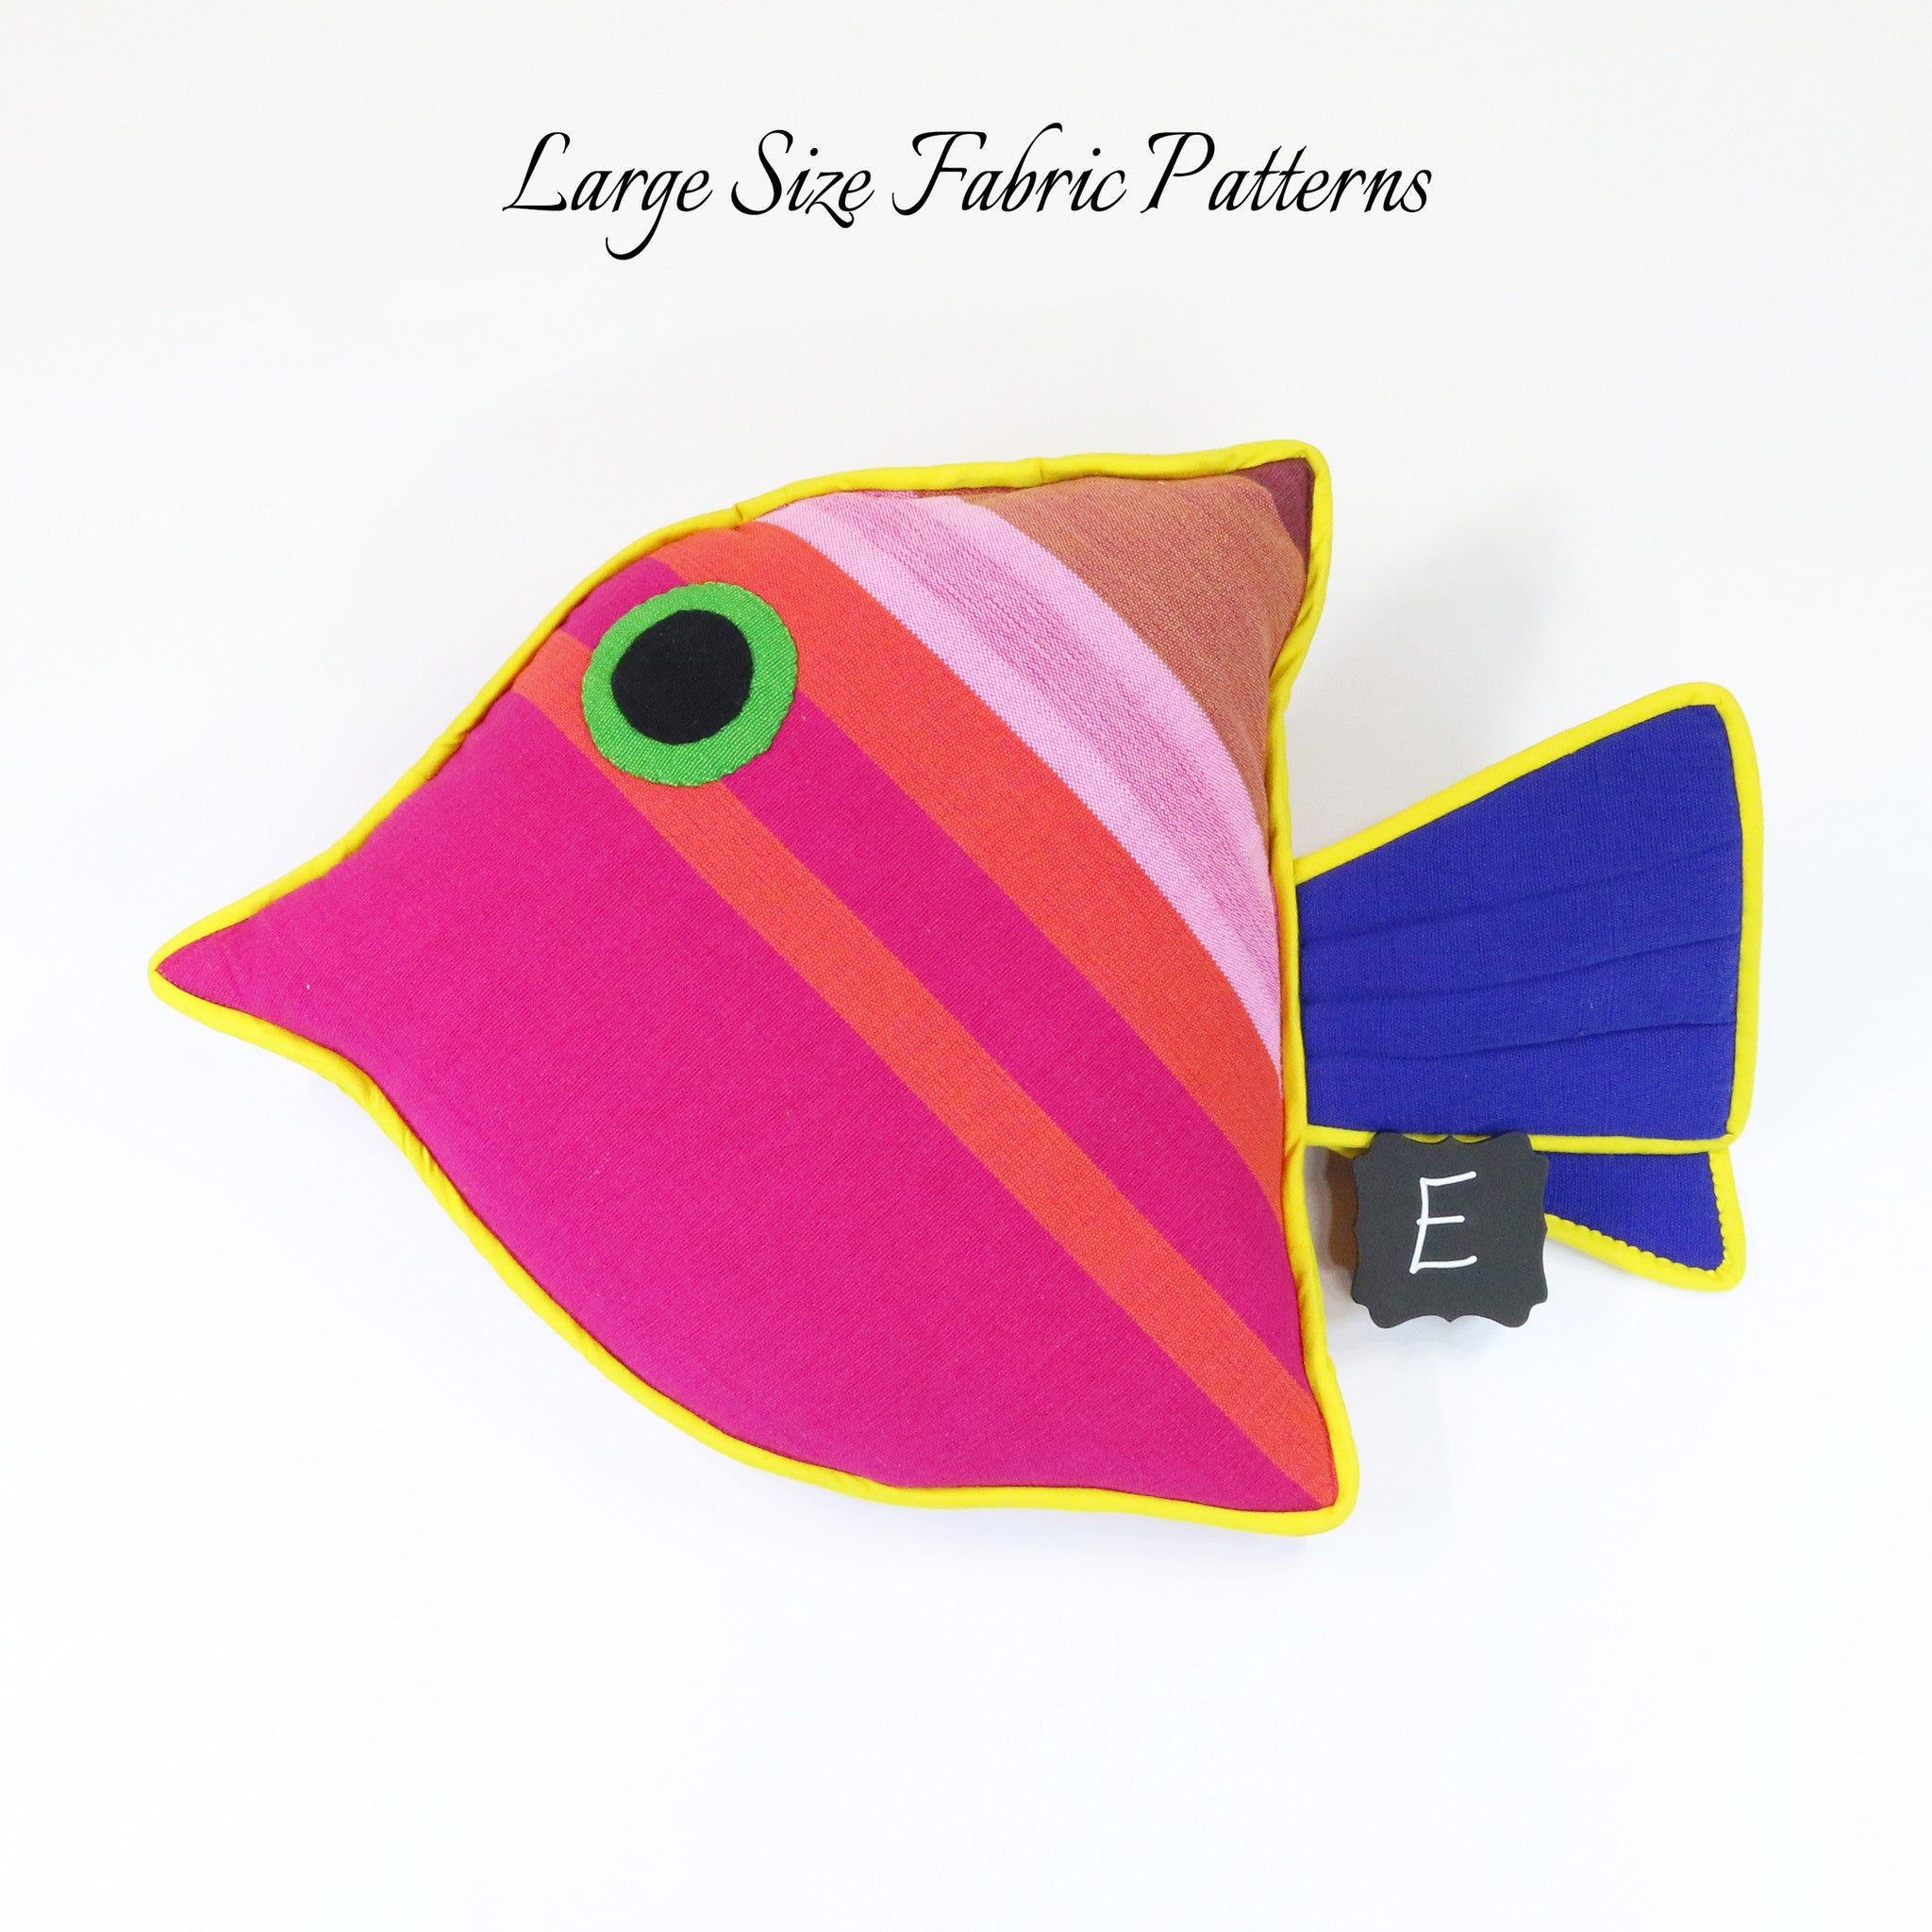 Lily, the Juvenile Fish – large size fabric patterns shown